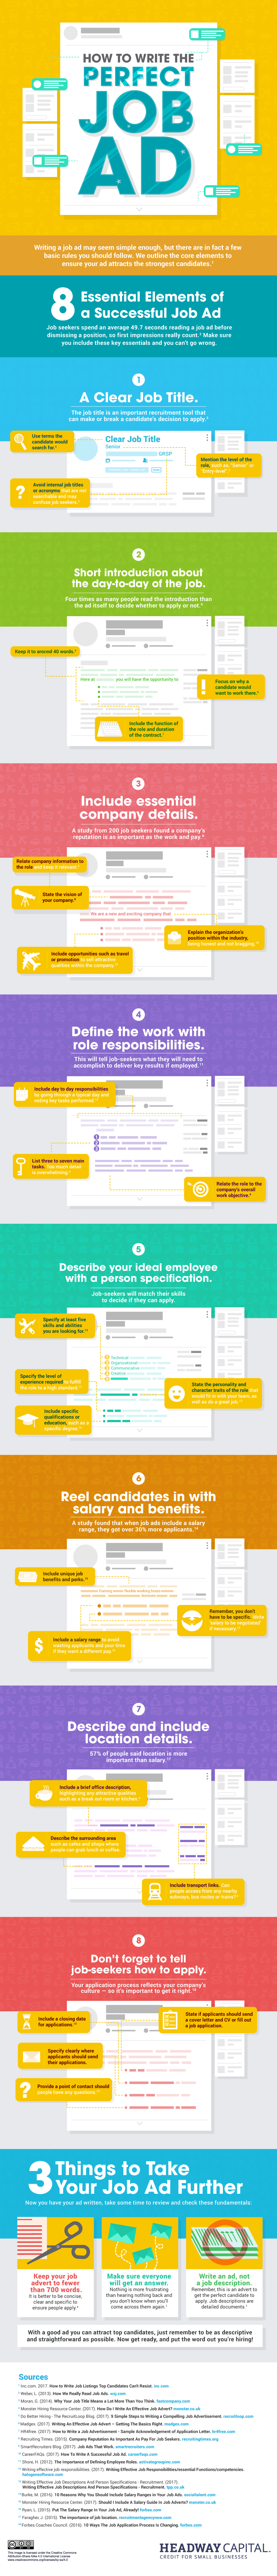 How To Write The Perfect Job Ad - #infographic